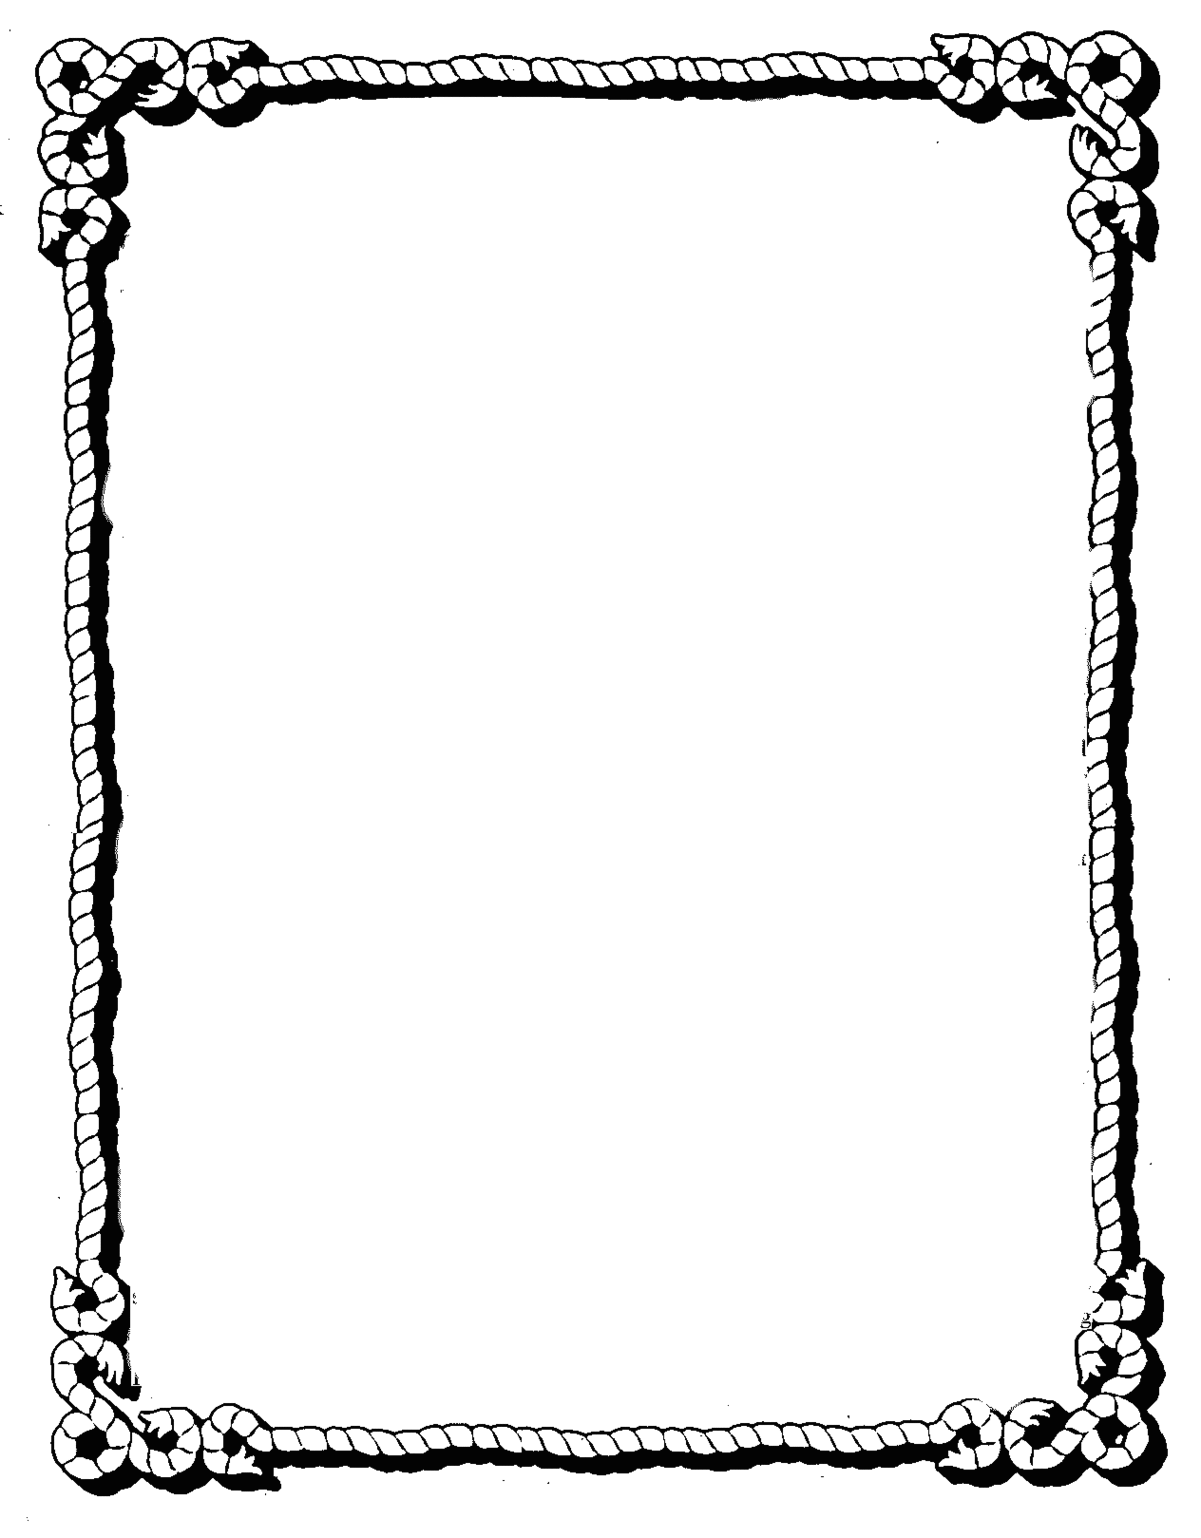 Cute Page Border Courseimage Clipart - Free to use Clip Art Resource